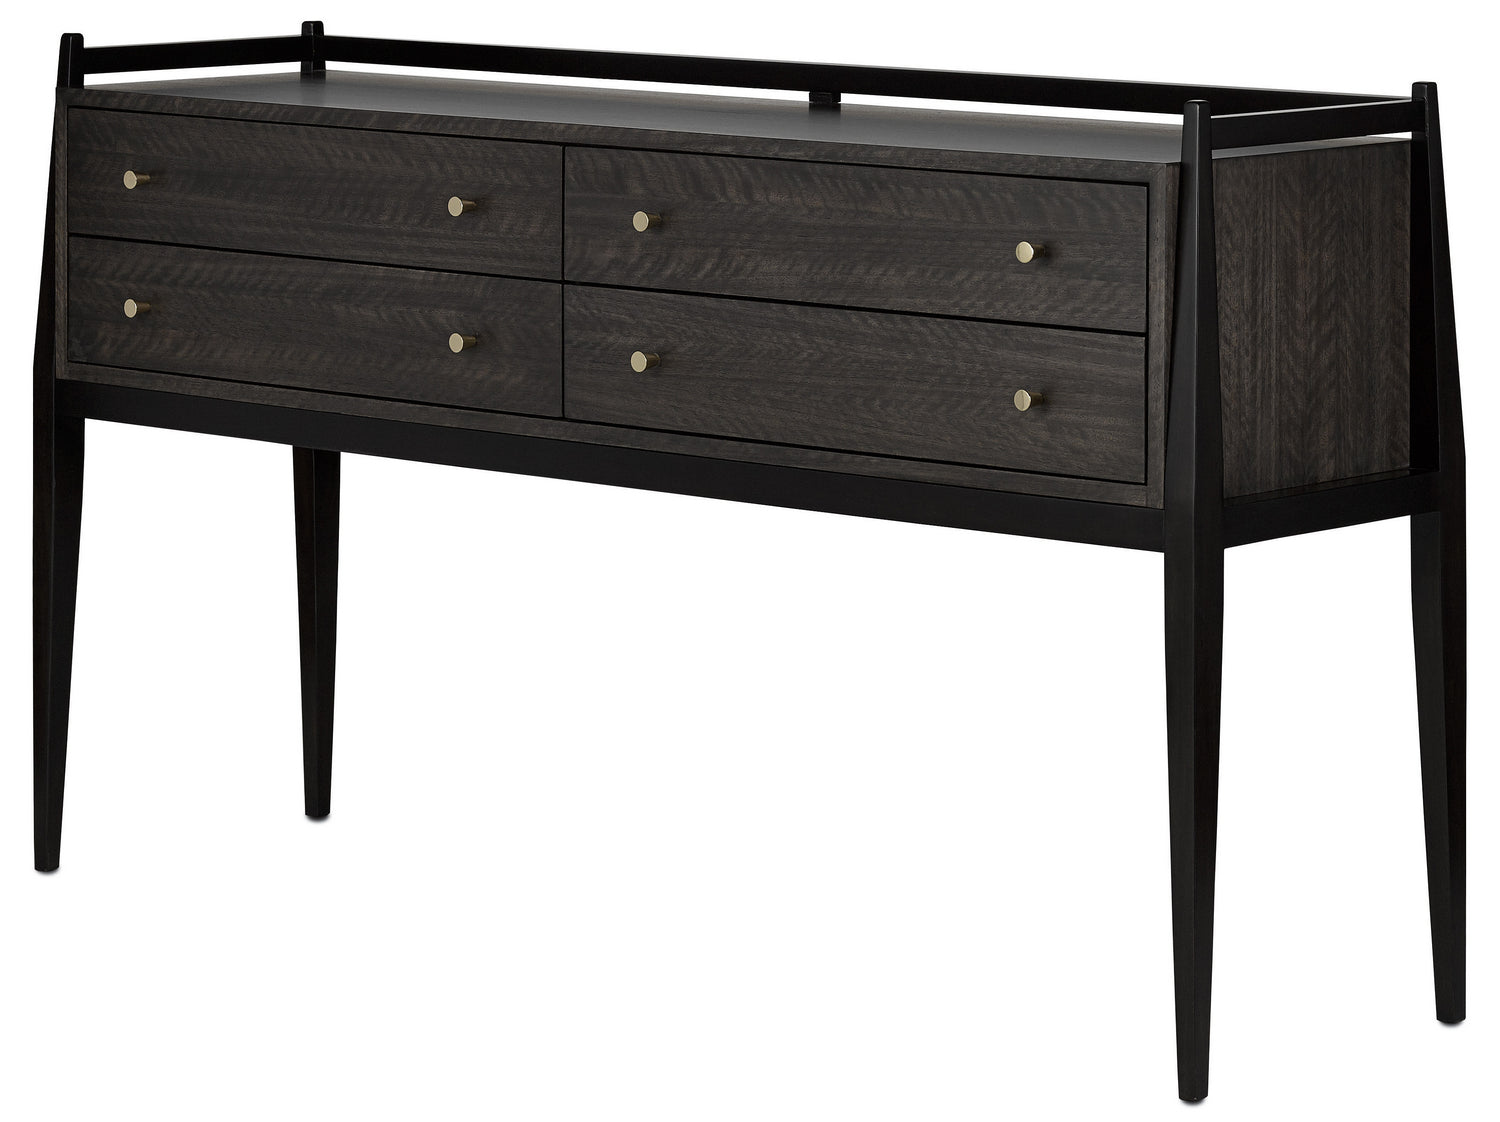 Console Table from the Selig collection in Dark Mink/Riverstone Gray/Polished Brass finish